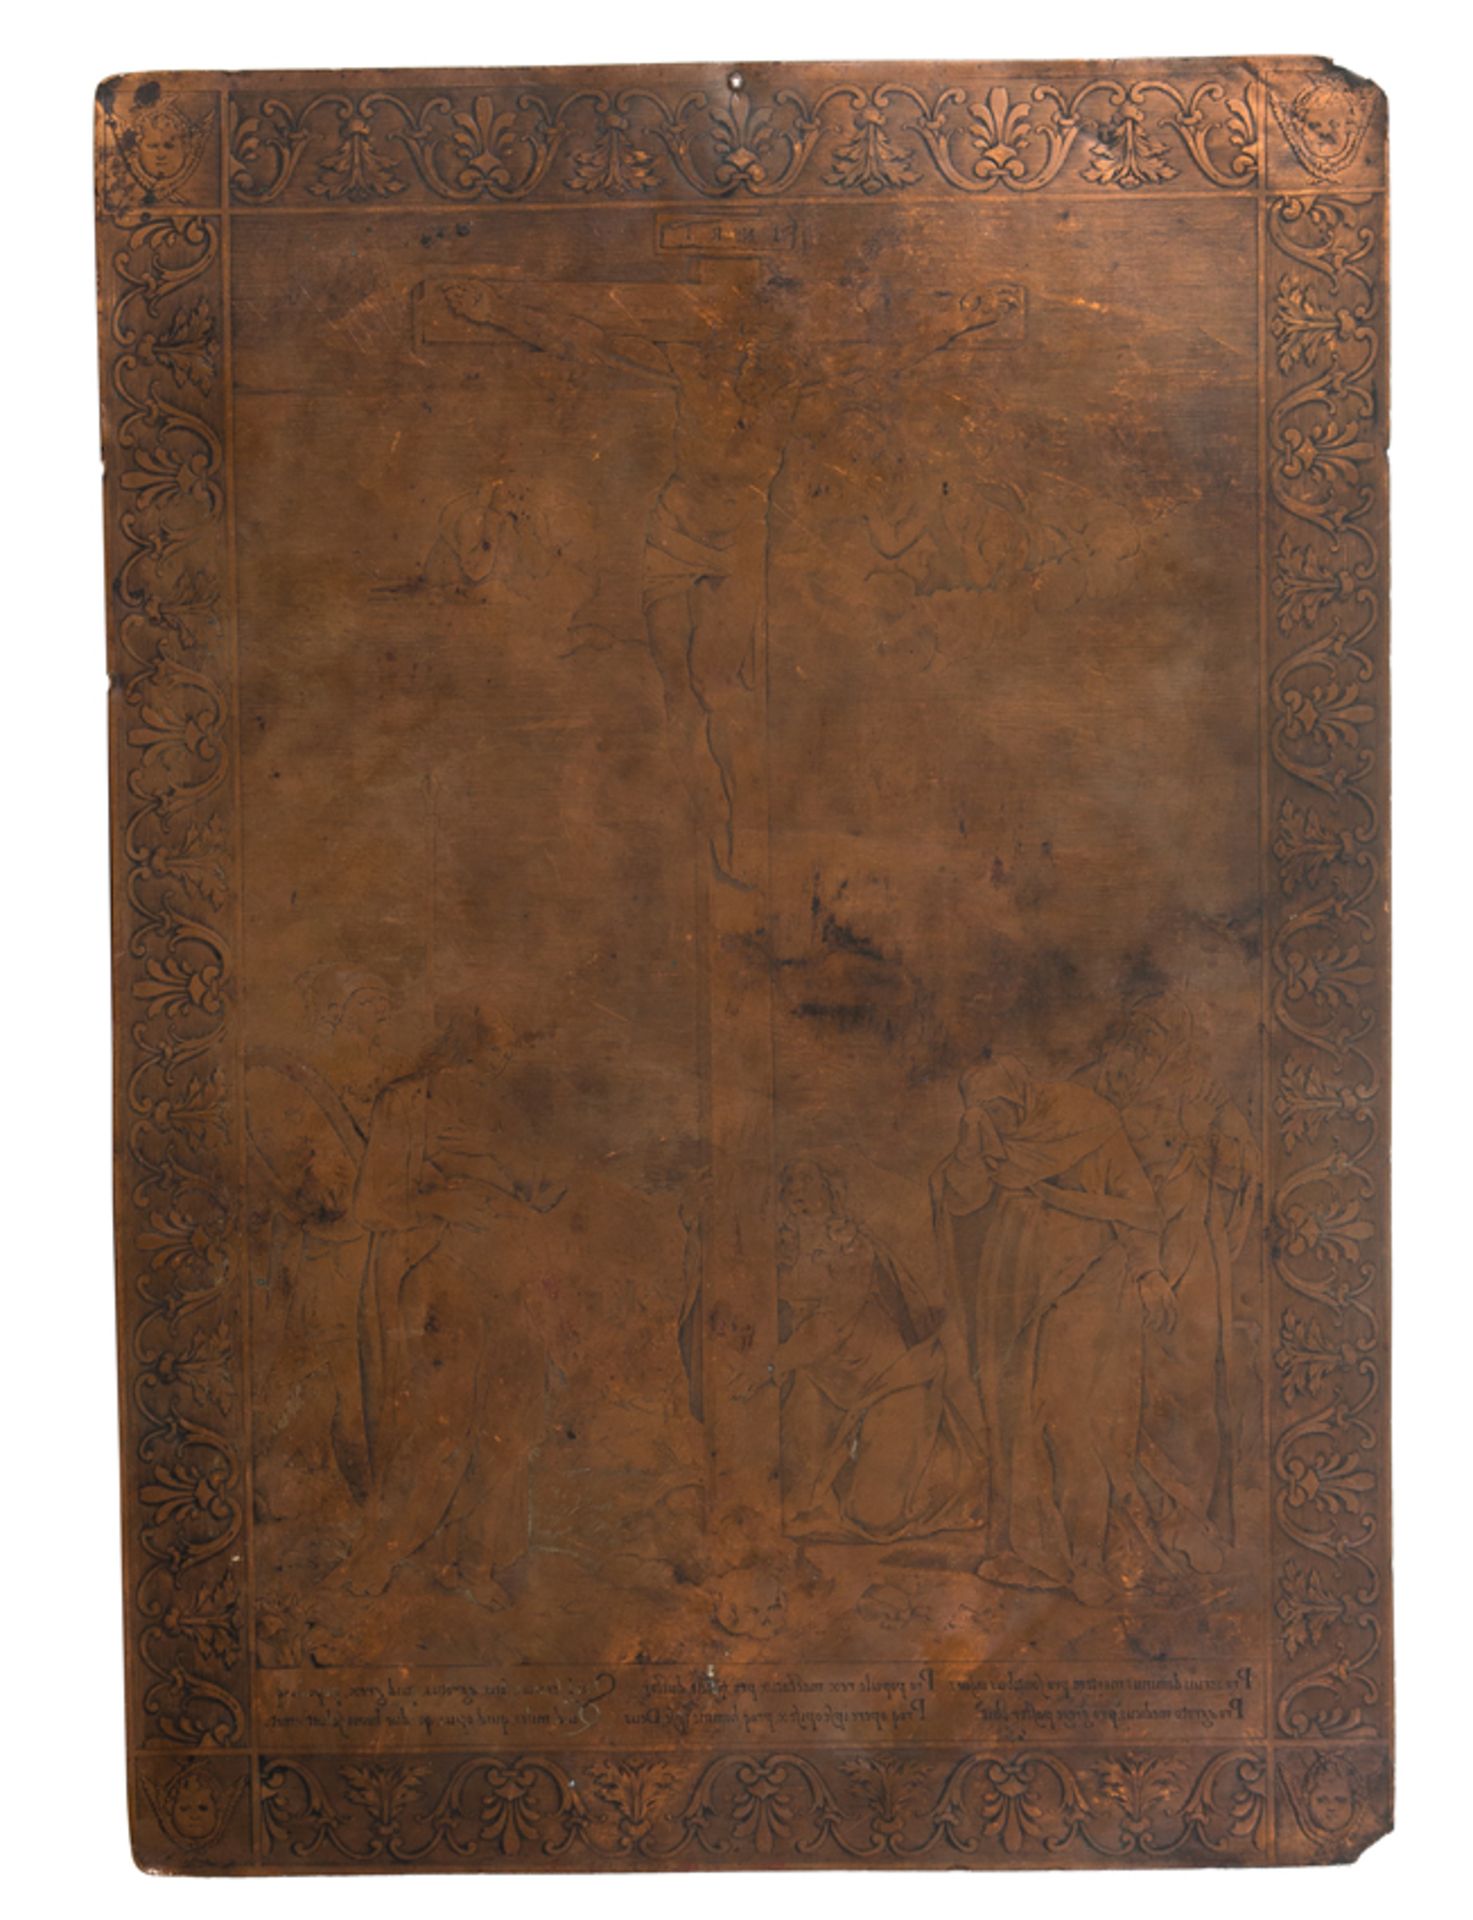 Engraving copper plaque, worked on both sides.  16th and 18th century. - Image 2 of 12